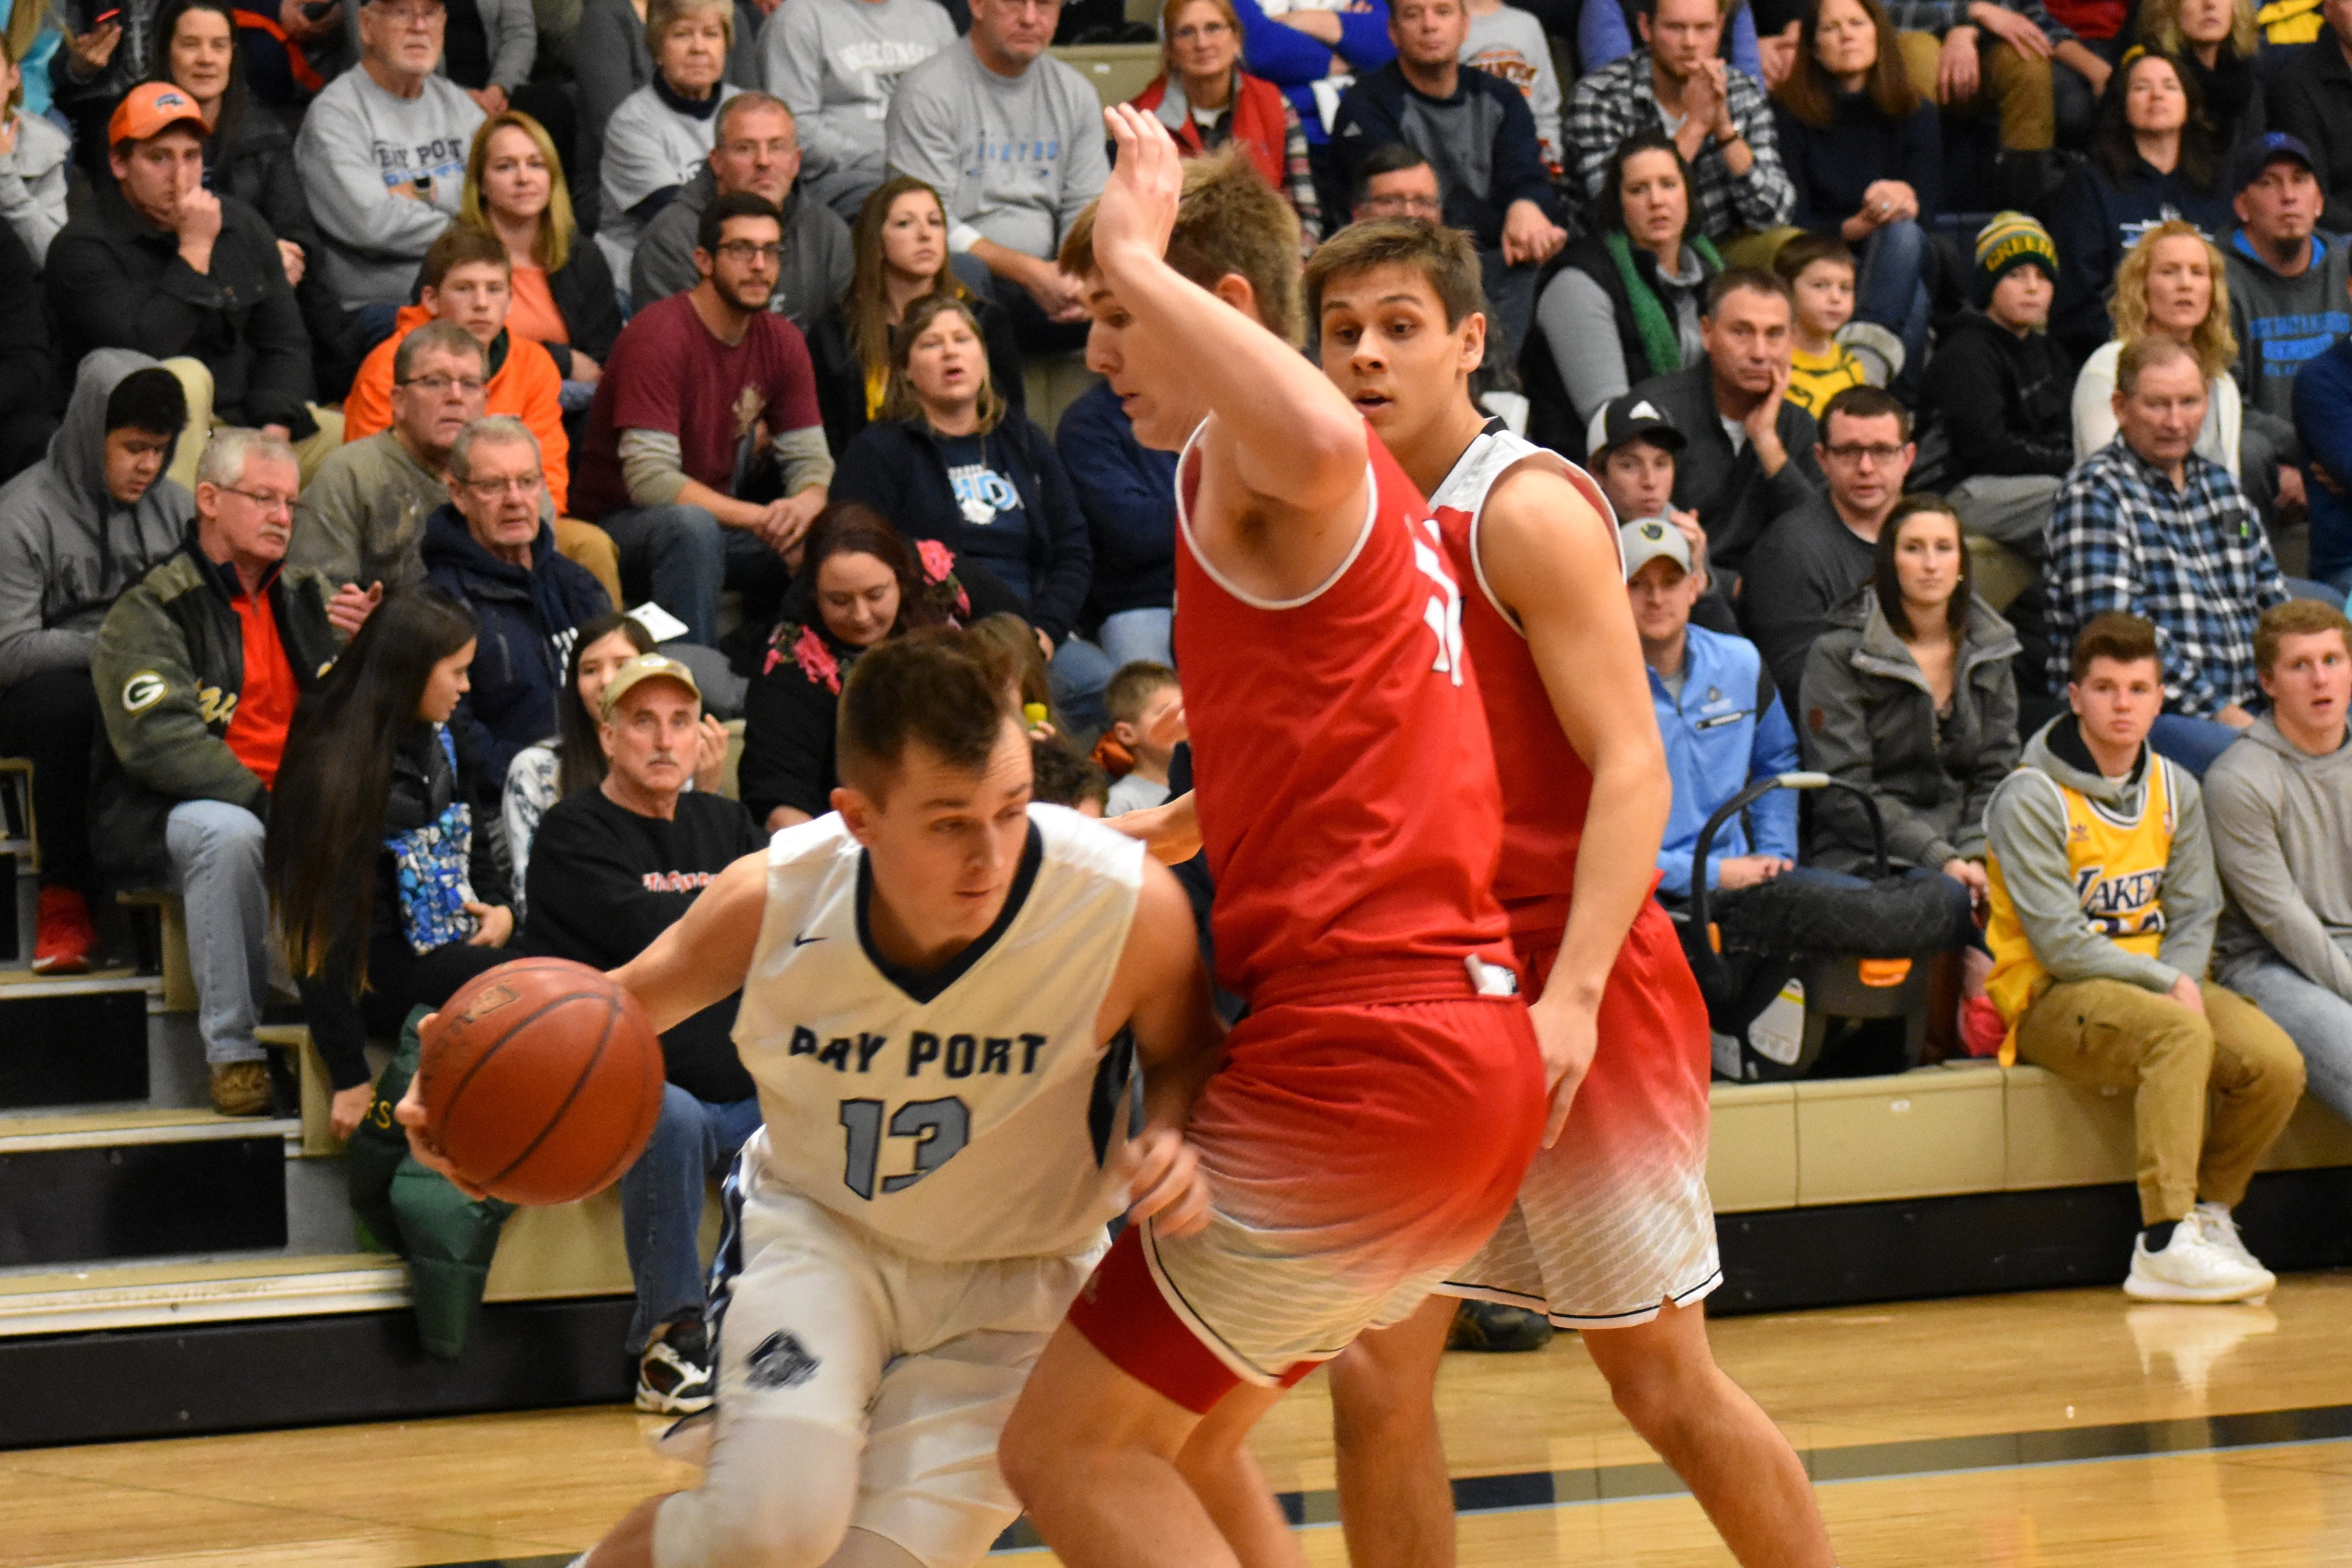 Pirates fall to Kimberly on last-second shot